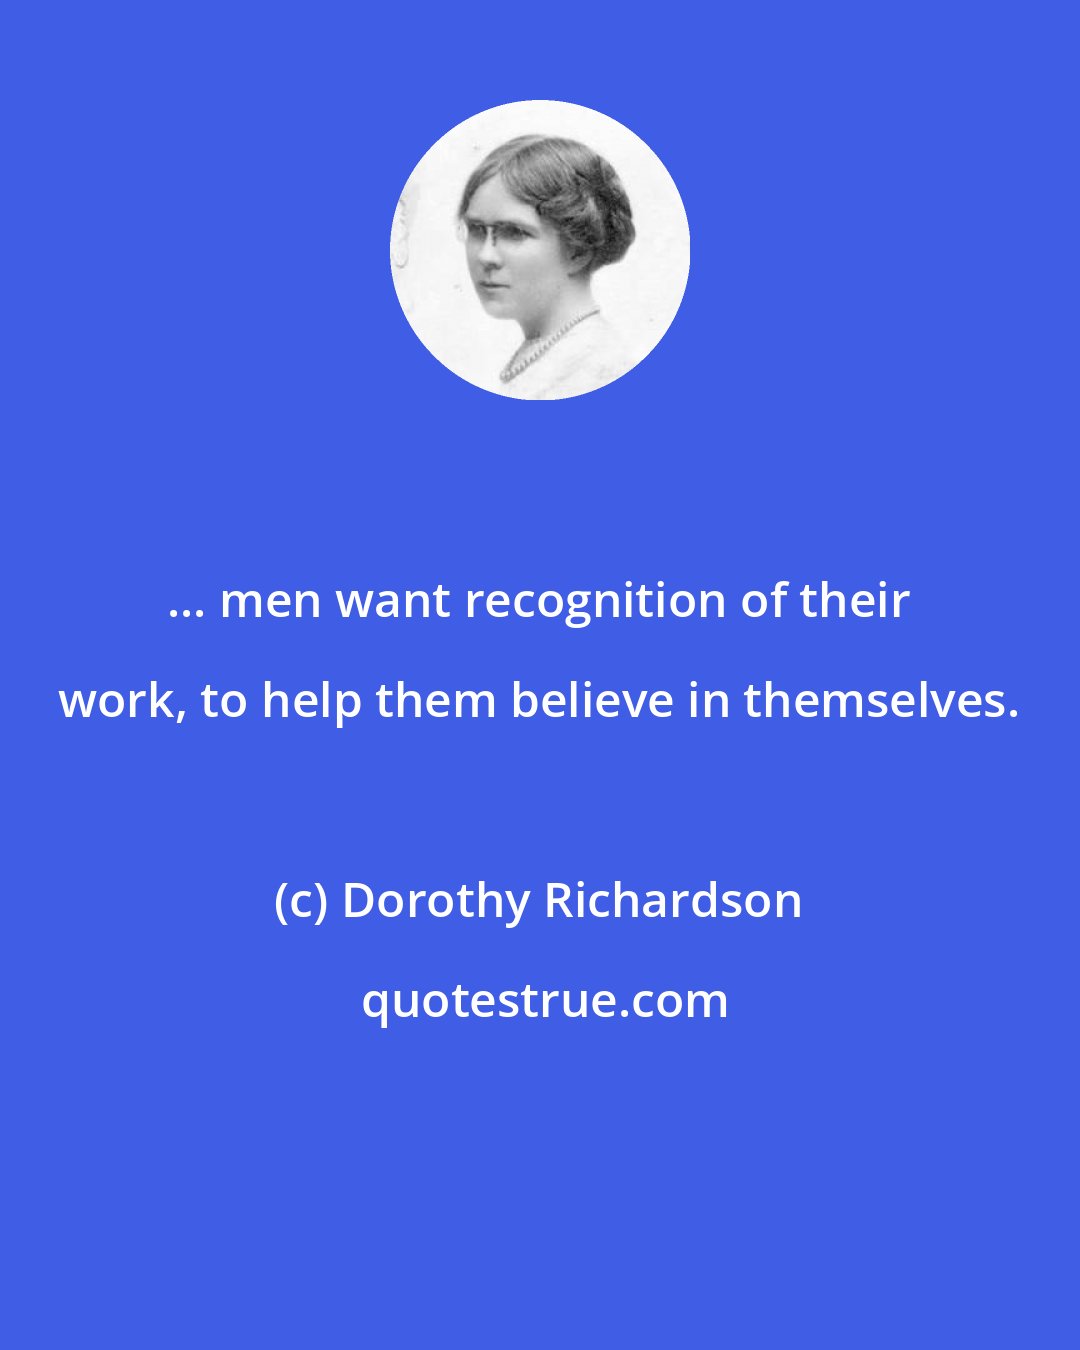 Dorothy Richardson: ... men want recognition of their work, to help them believe in themselves.